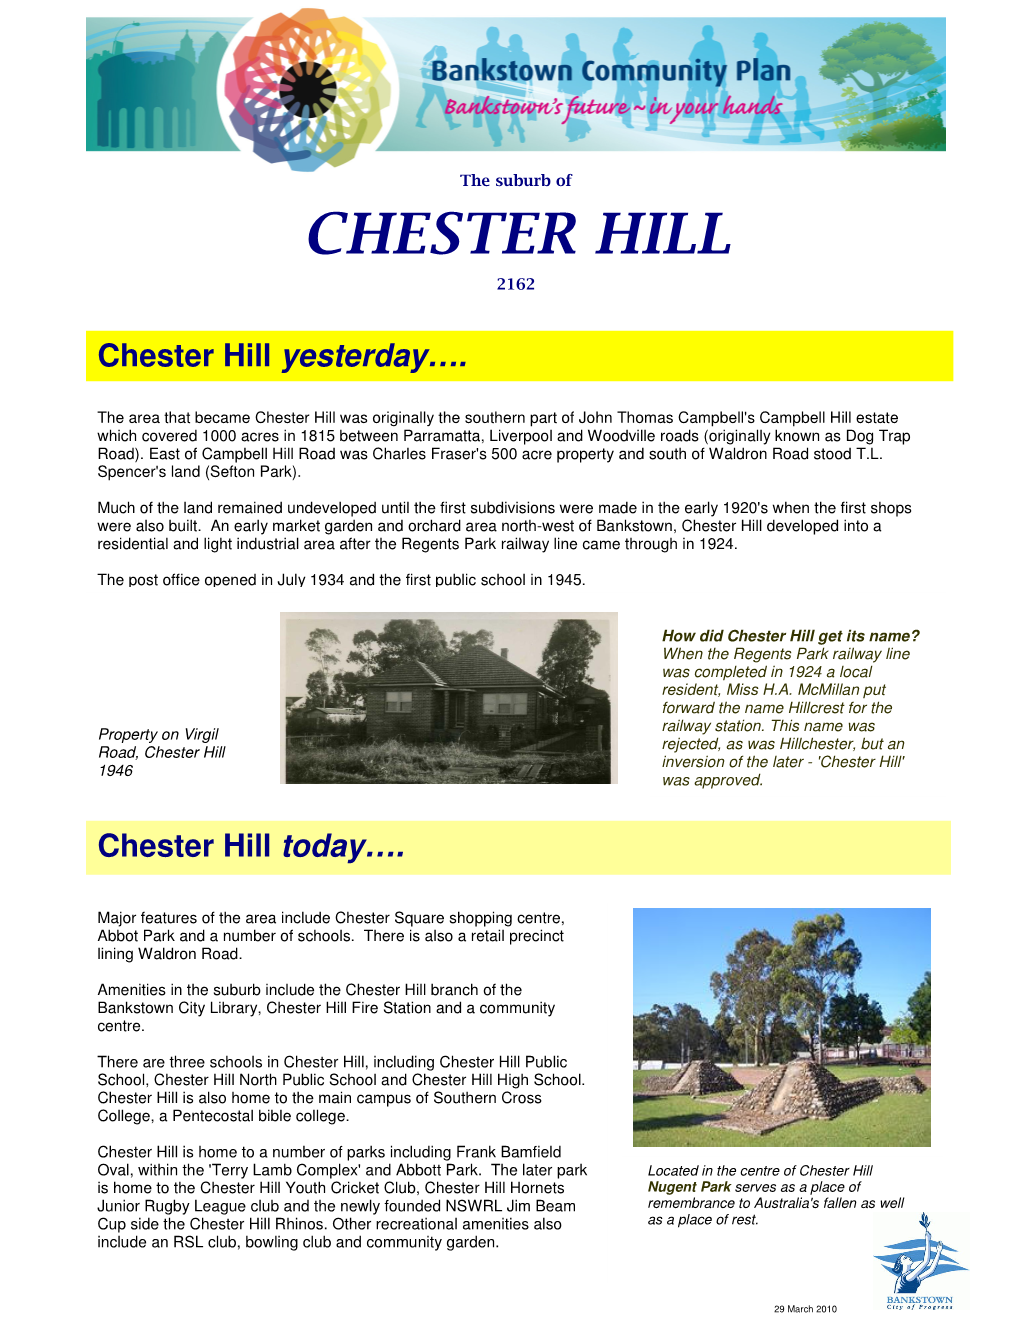 Chester Hill